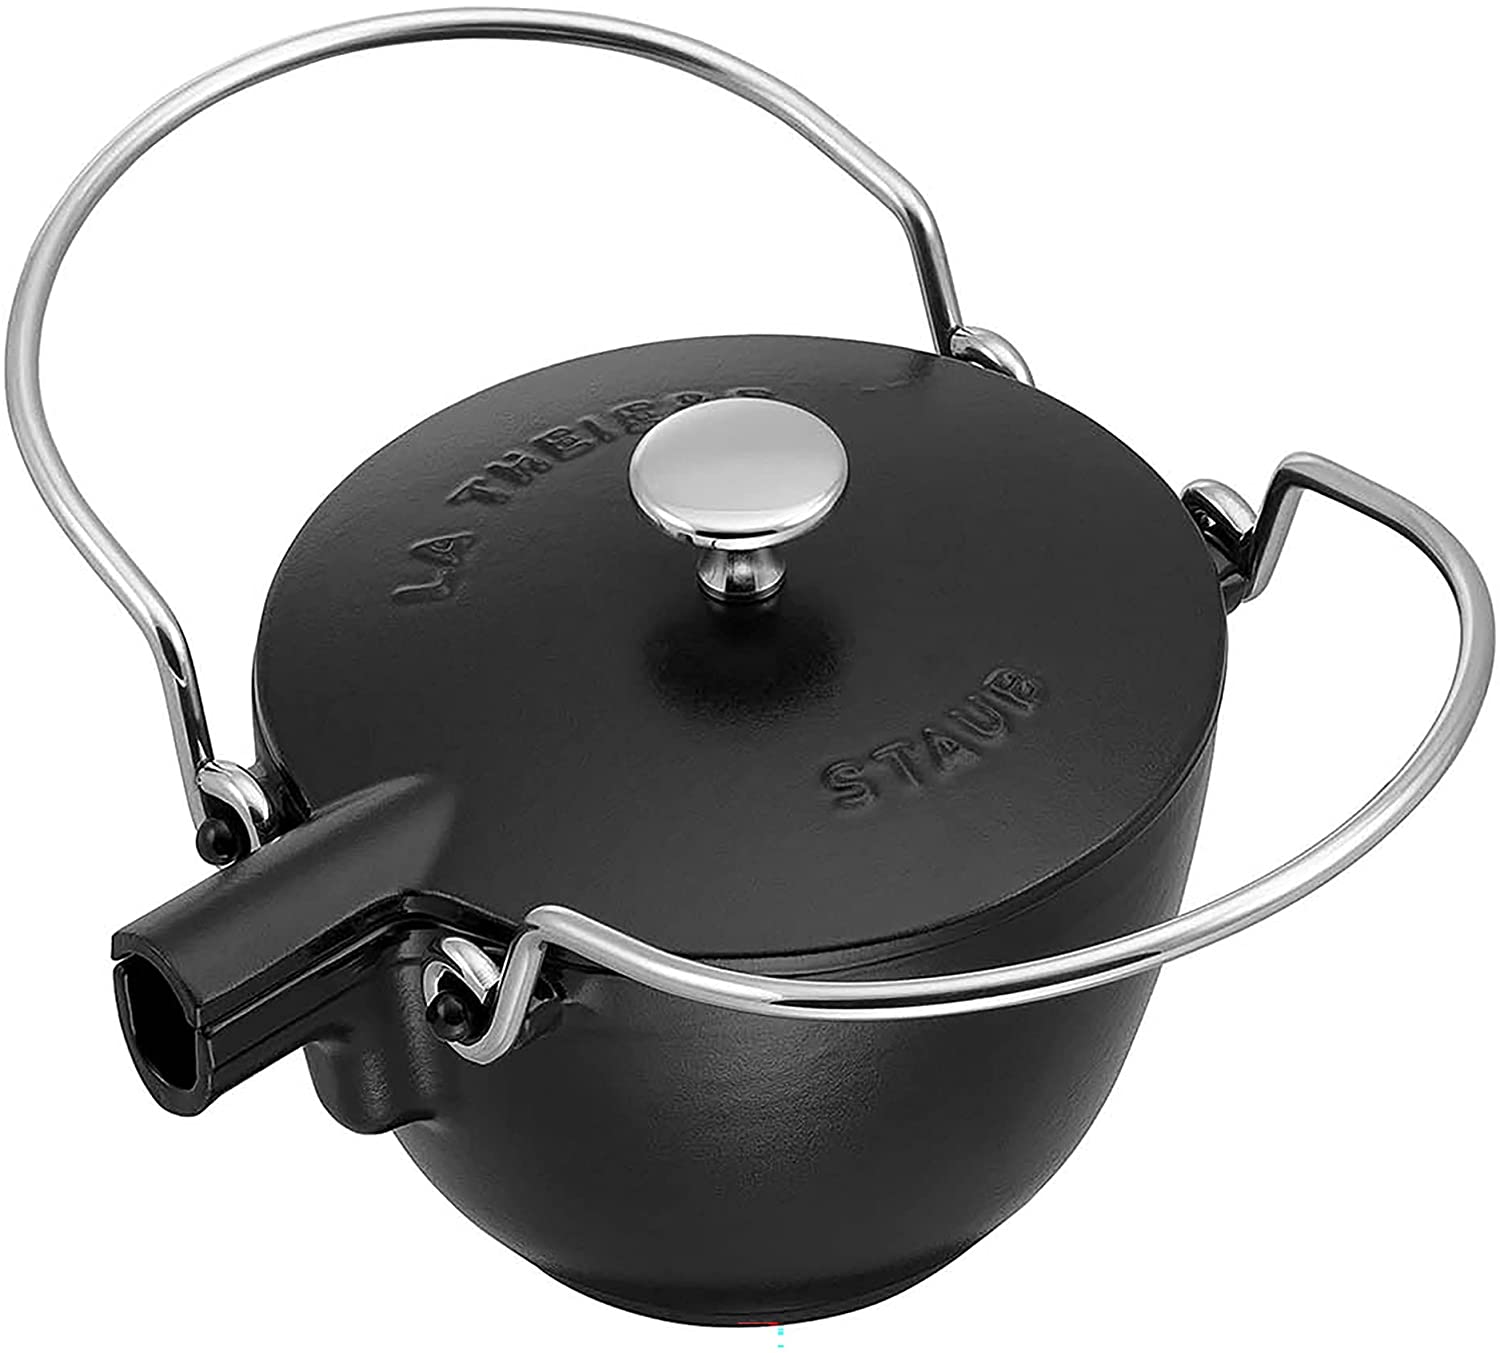 Staub Tea Kettle Review: Is This Kettle Brand Worth Investing In